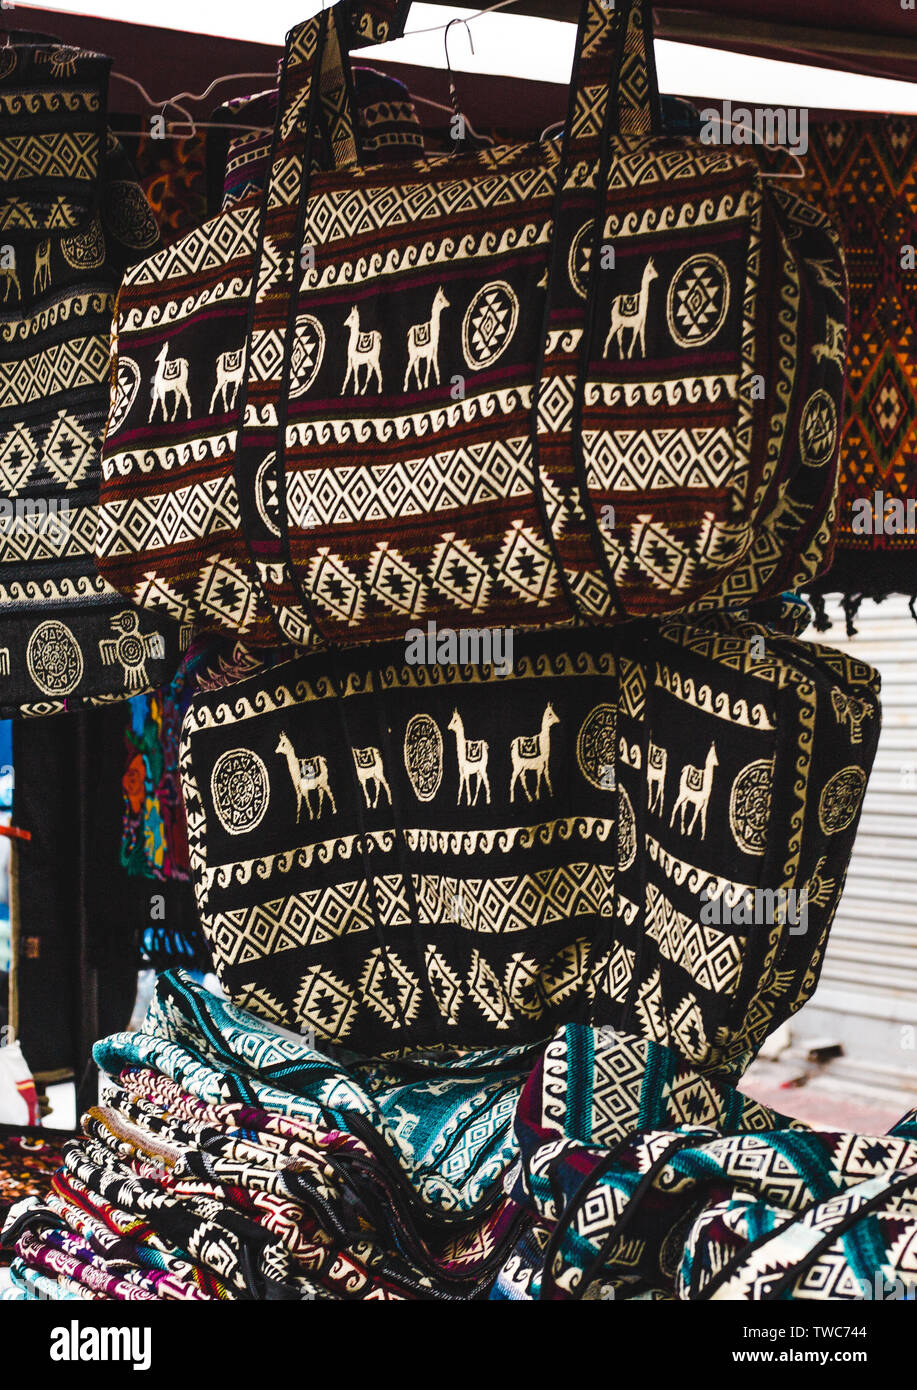 Street stall with woven fabric llama bag souvenirs in Otavalo, Ecuador, one of the biggest artisanal markets in South America Stock Photo